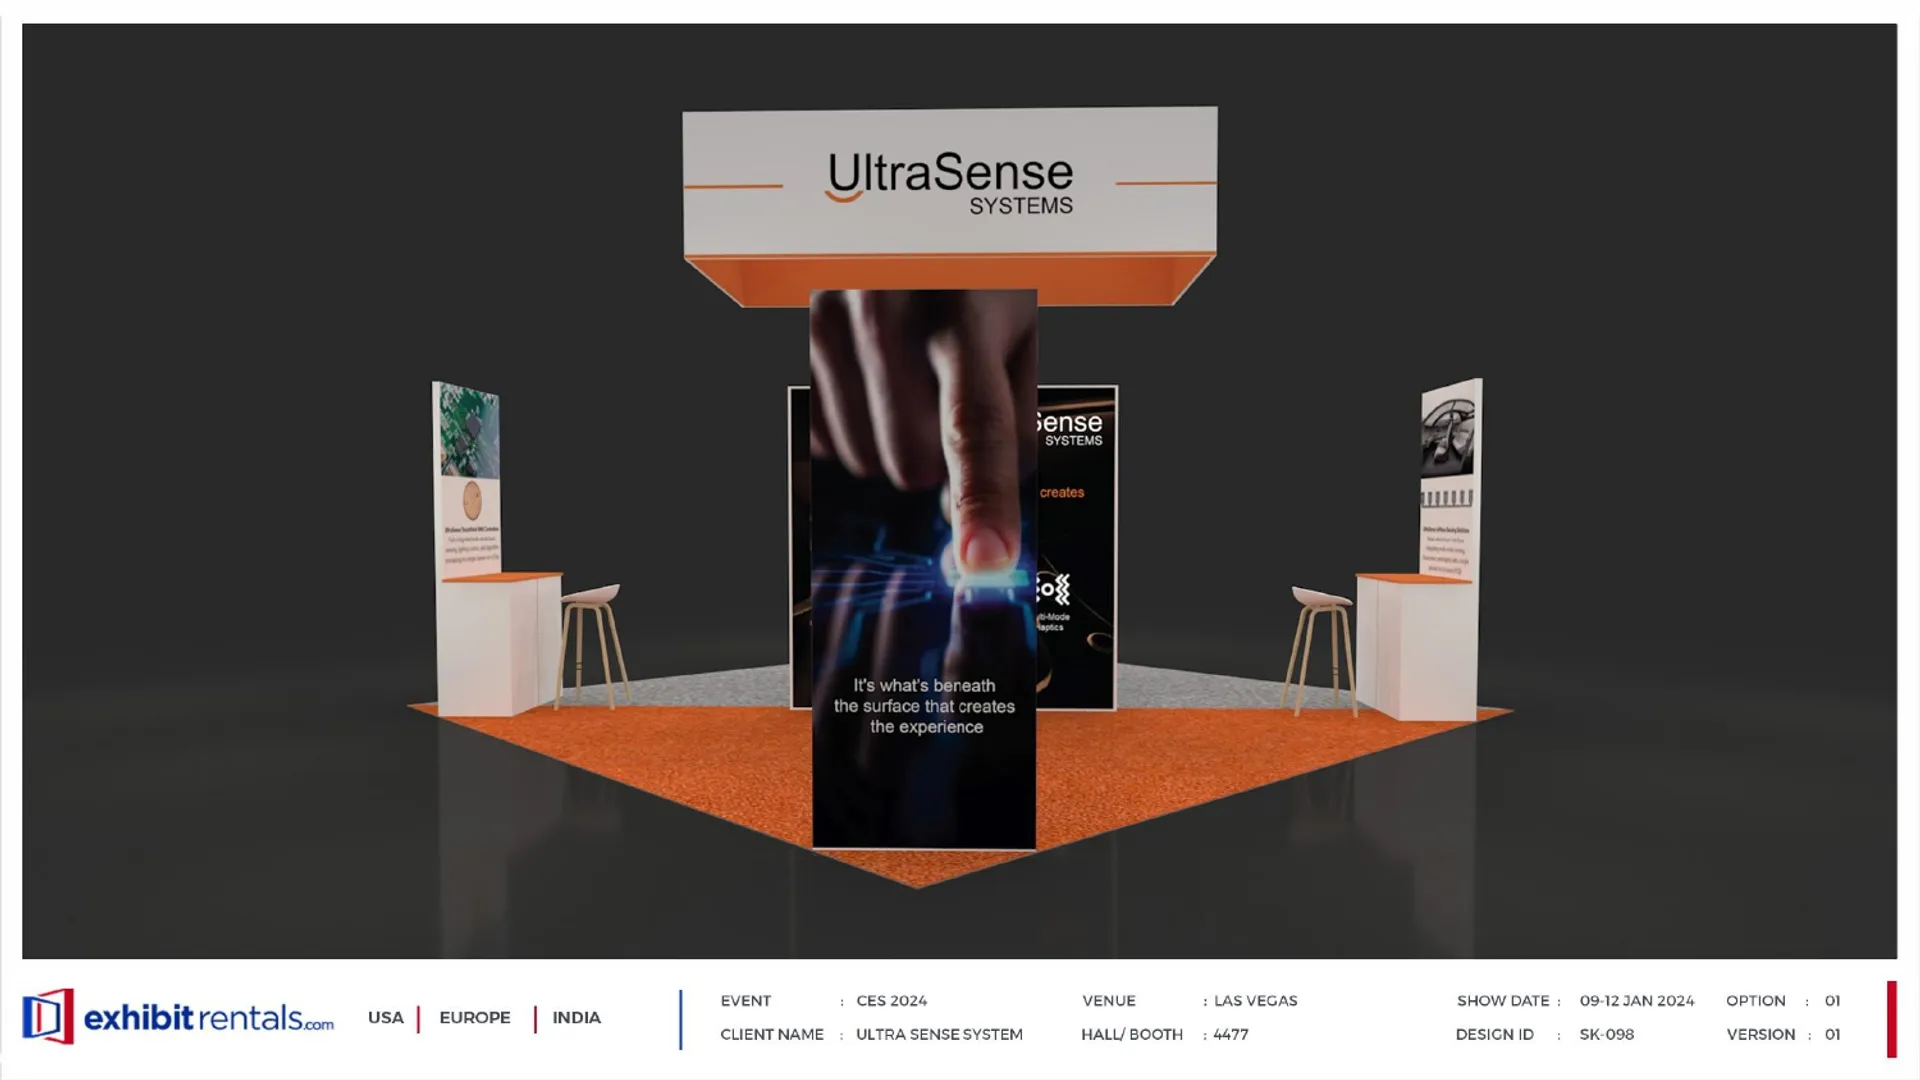 booth-design-projects/Exhibit-Rentals/2024-04-18-20x20-ISLAND-Project-108/1.1 - UltraSense System - ER Design Presentation.pptx-16_page-0001-qkv4r.jpg